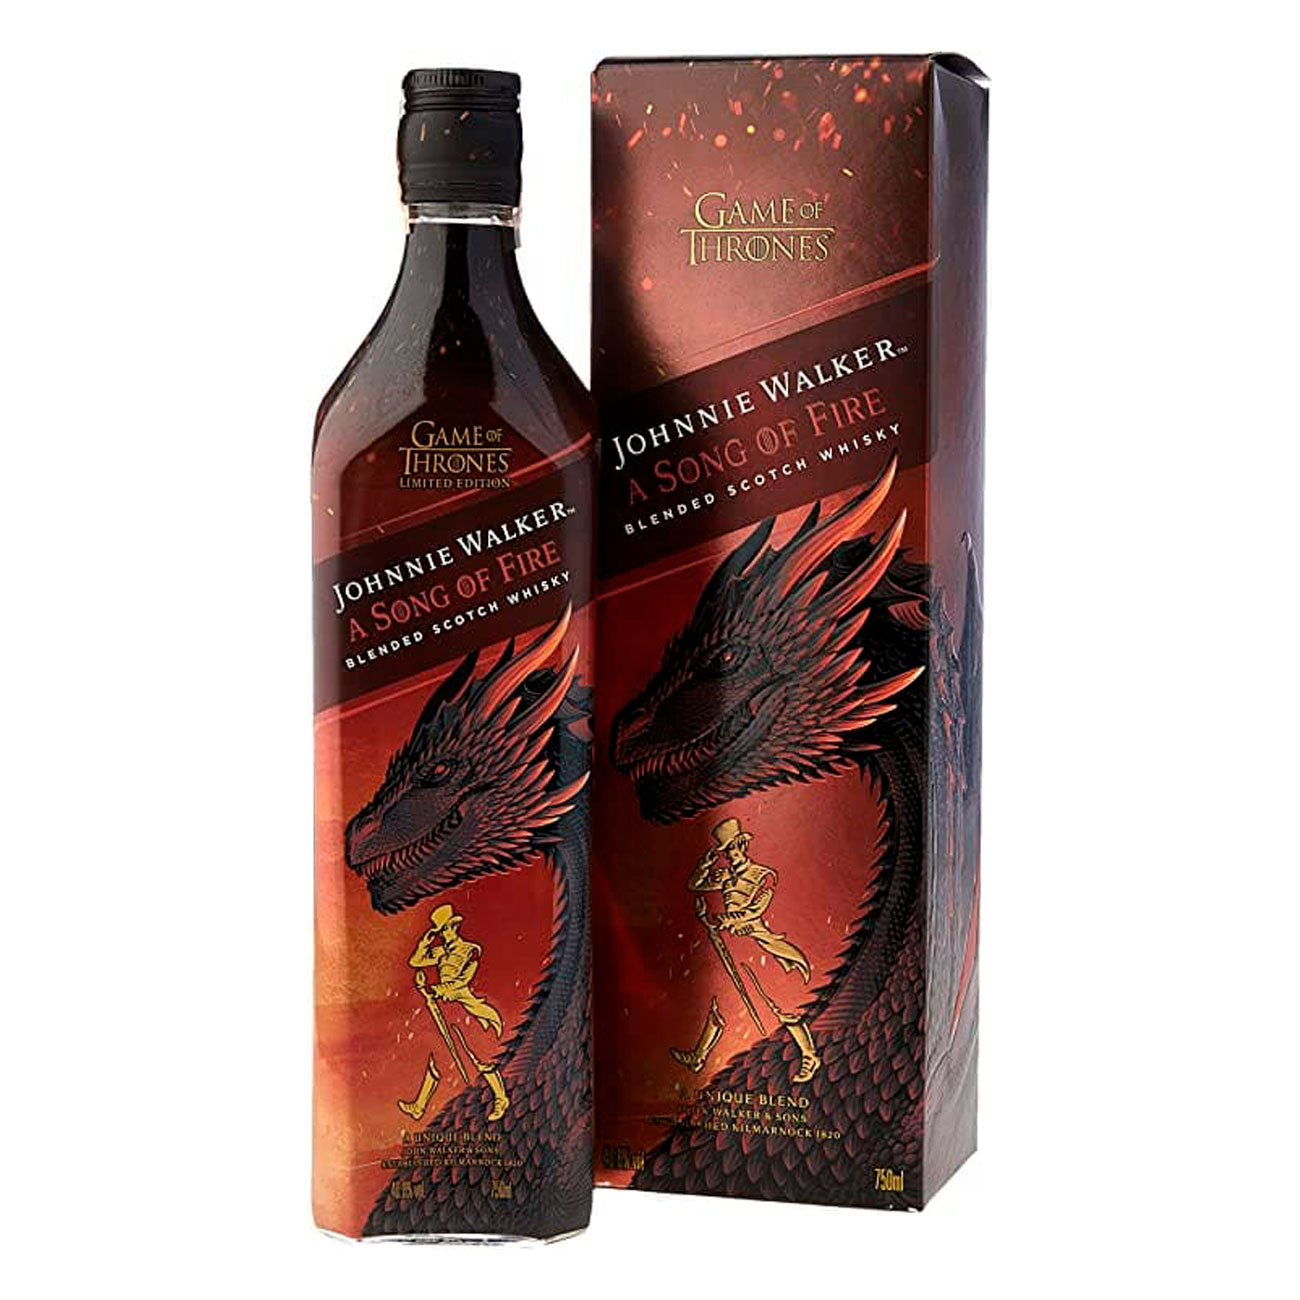 Whisky Escocs Johnnie Walker Song of Fire 750ml